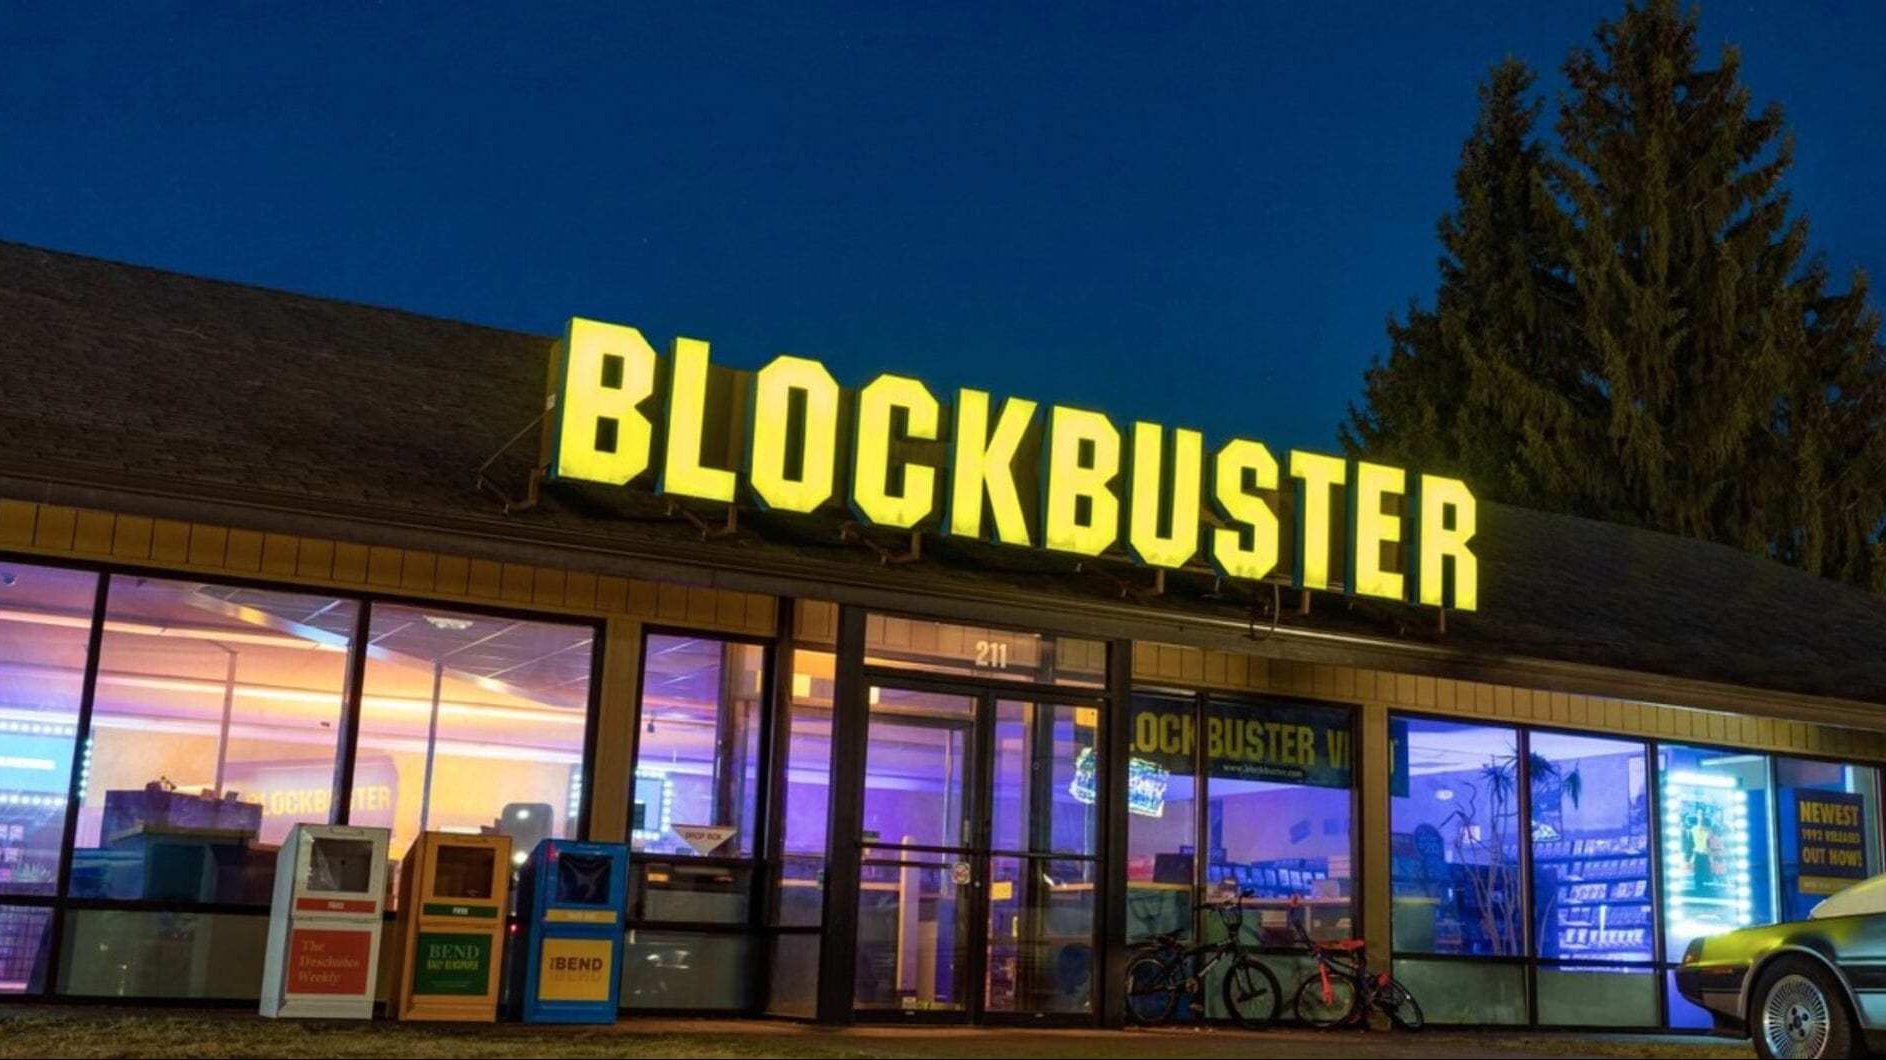 The Final Blockbuster Is Now an Airbnb